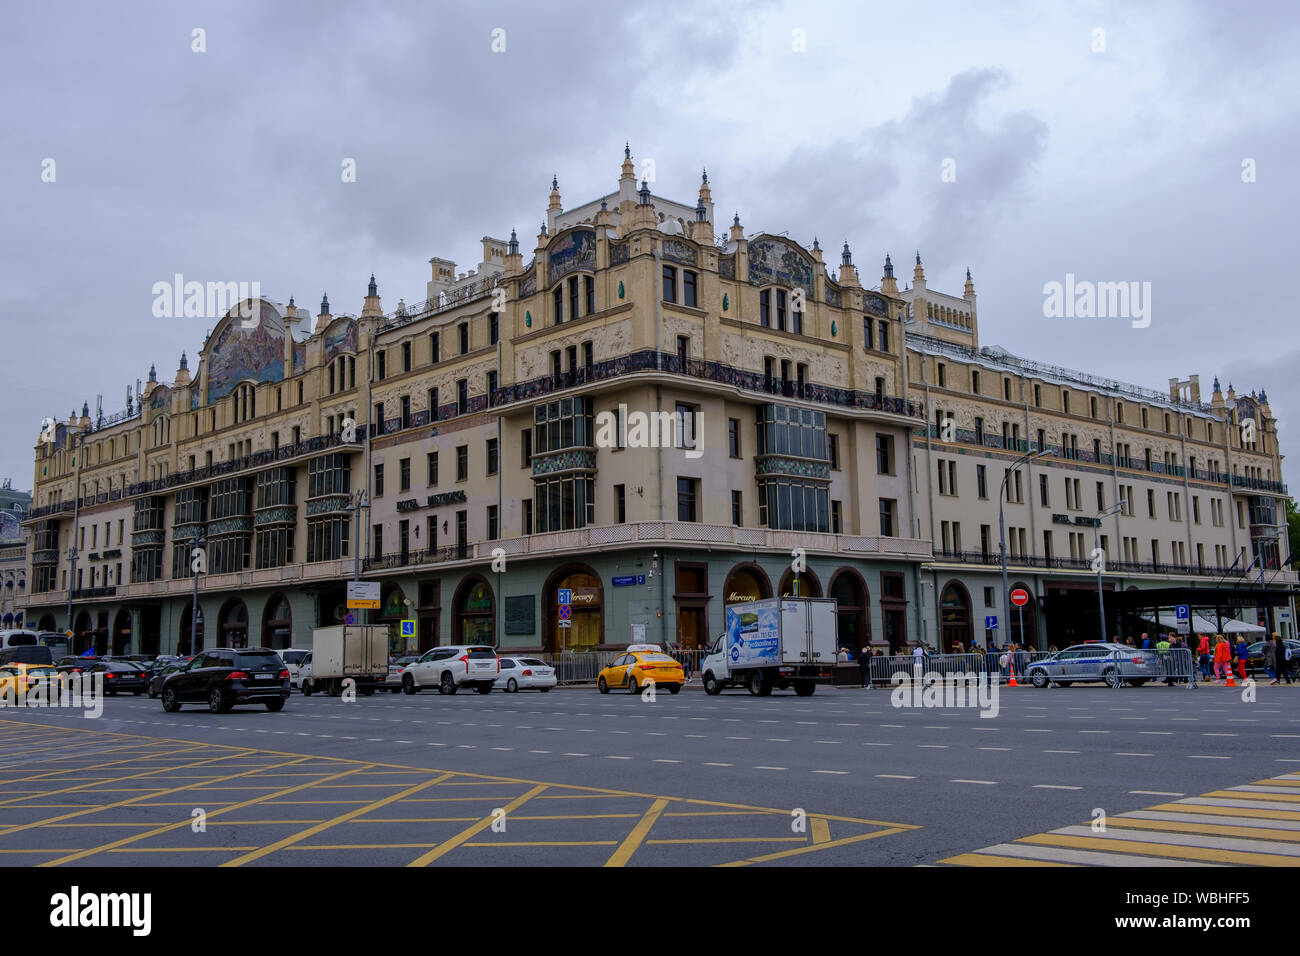 MOSCOW, RUSSIA - AUGUST 2, 2019: Metropol hotel, famous historical building and luxury five star hotel in Moscow Stock Photo